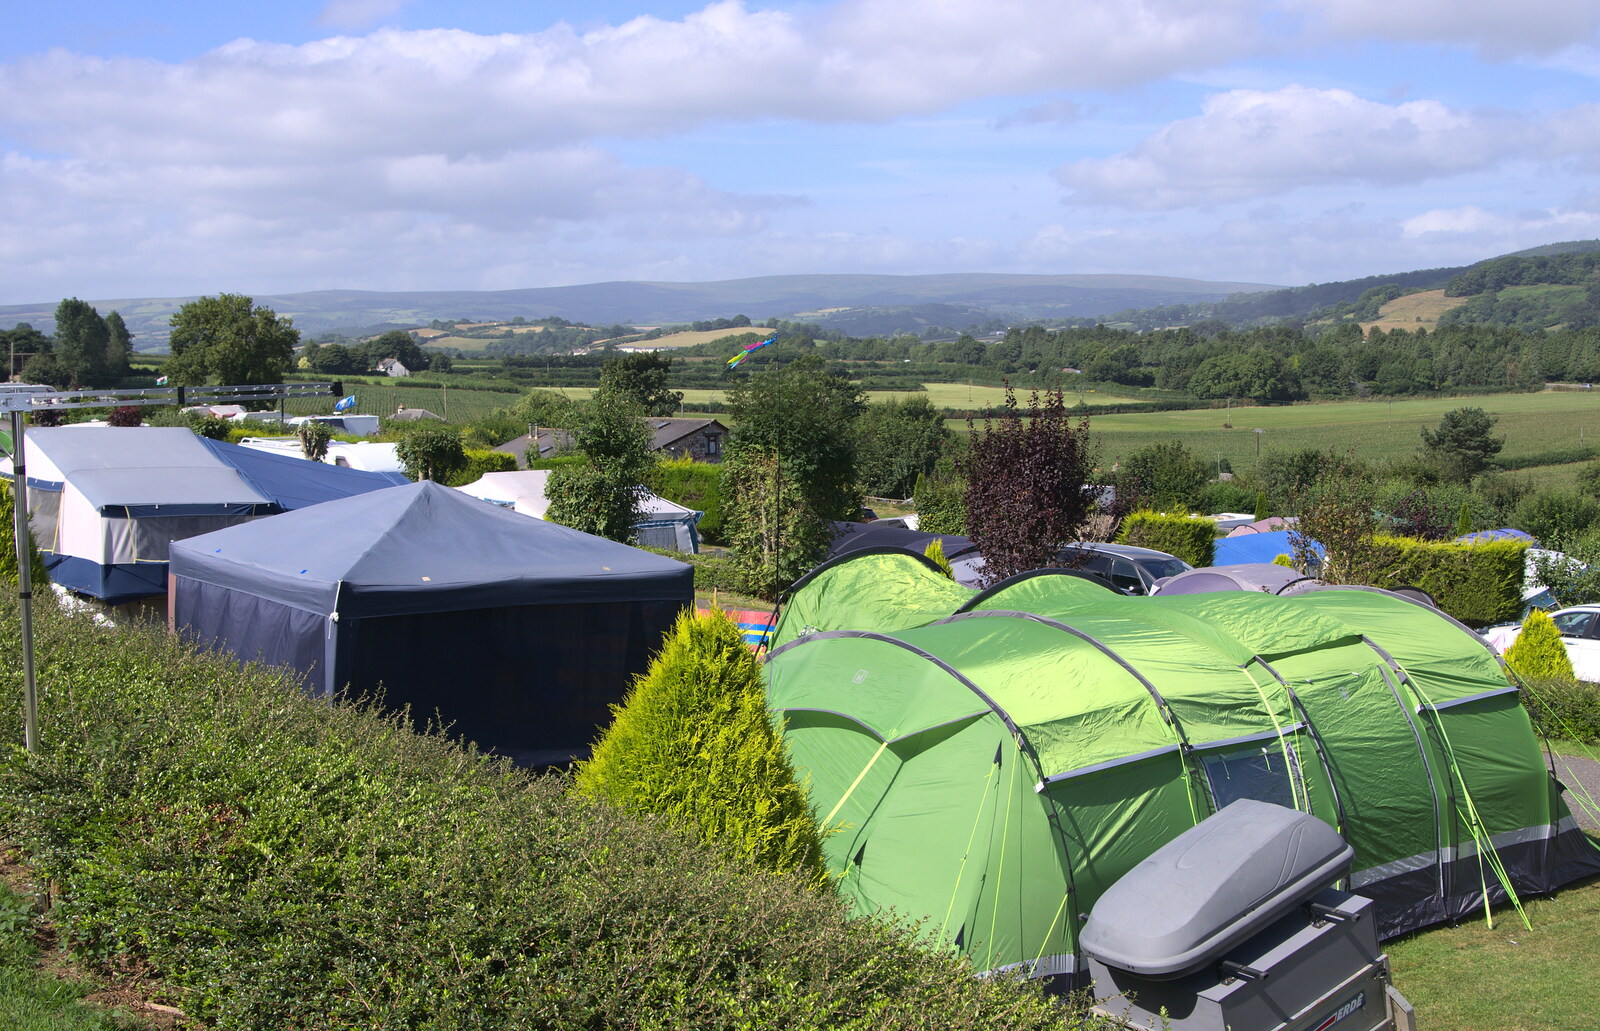 Tent city and the hills of Devon from Camping With Sean, Ashburton, Devon - 8th August 2016